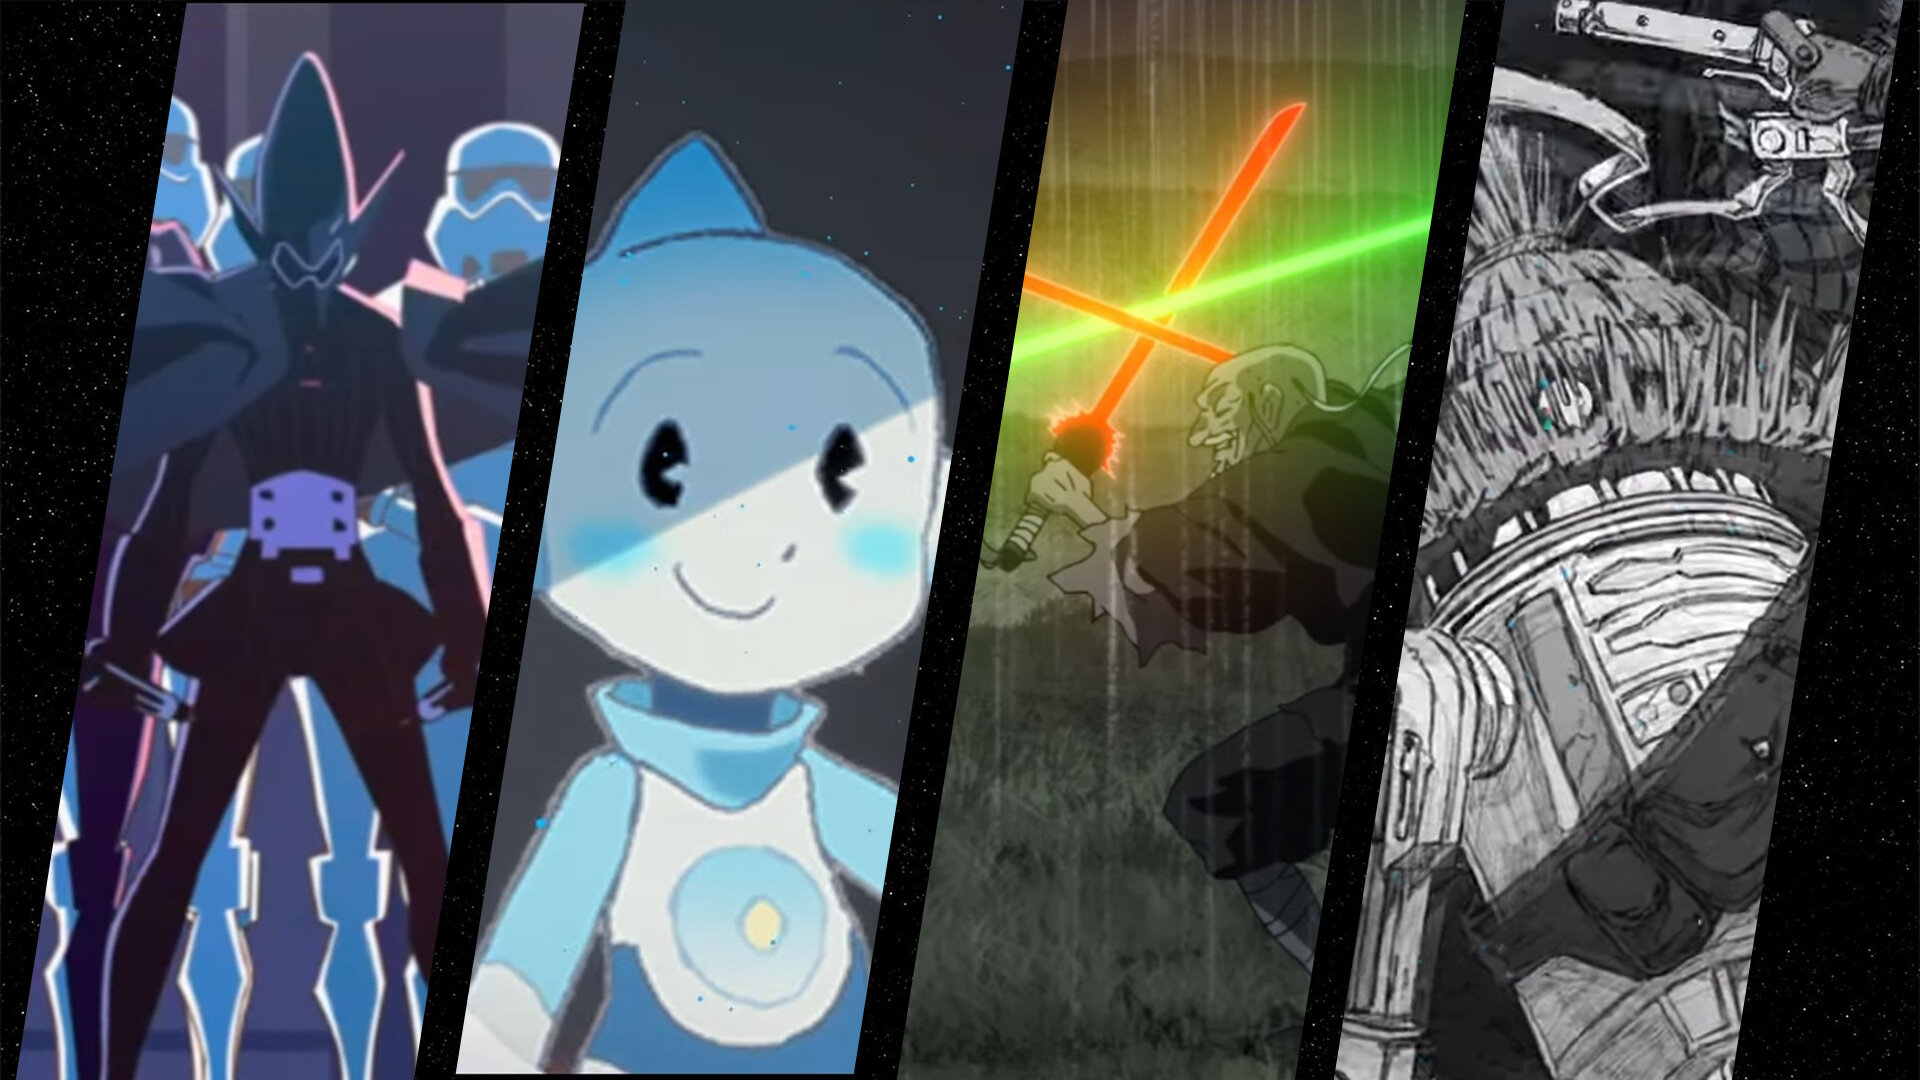 Disney+ share first look at 'Star Wars: Visions' anime series